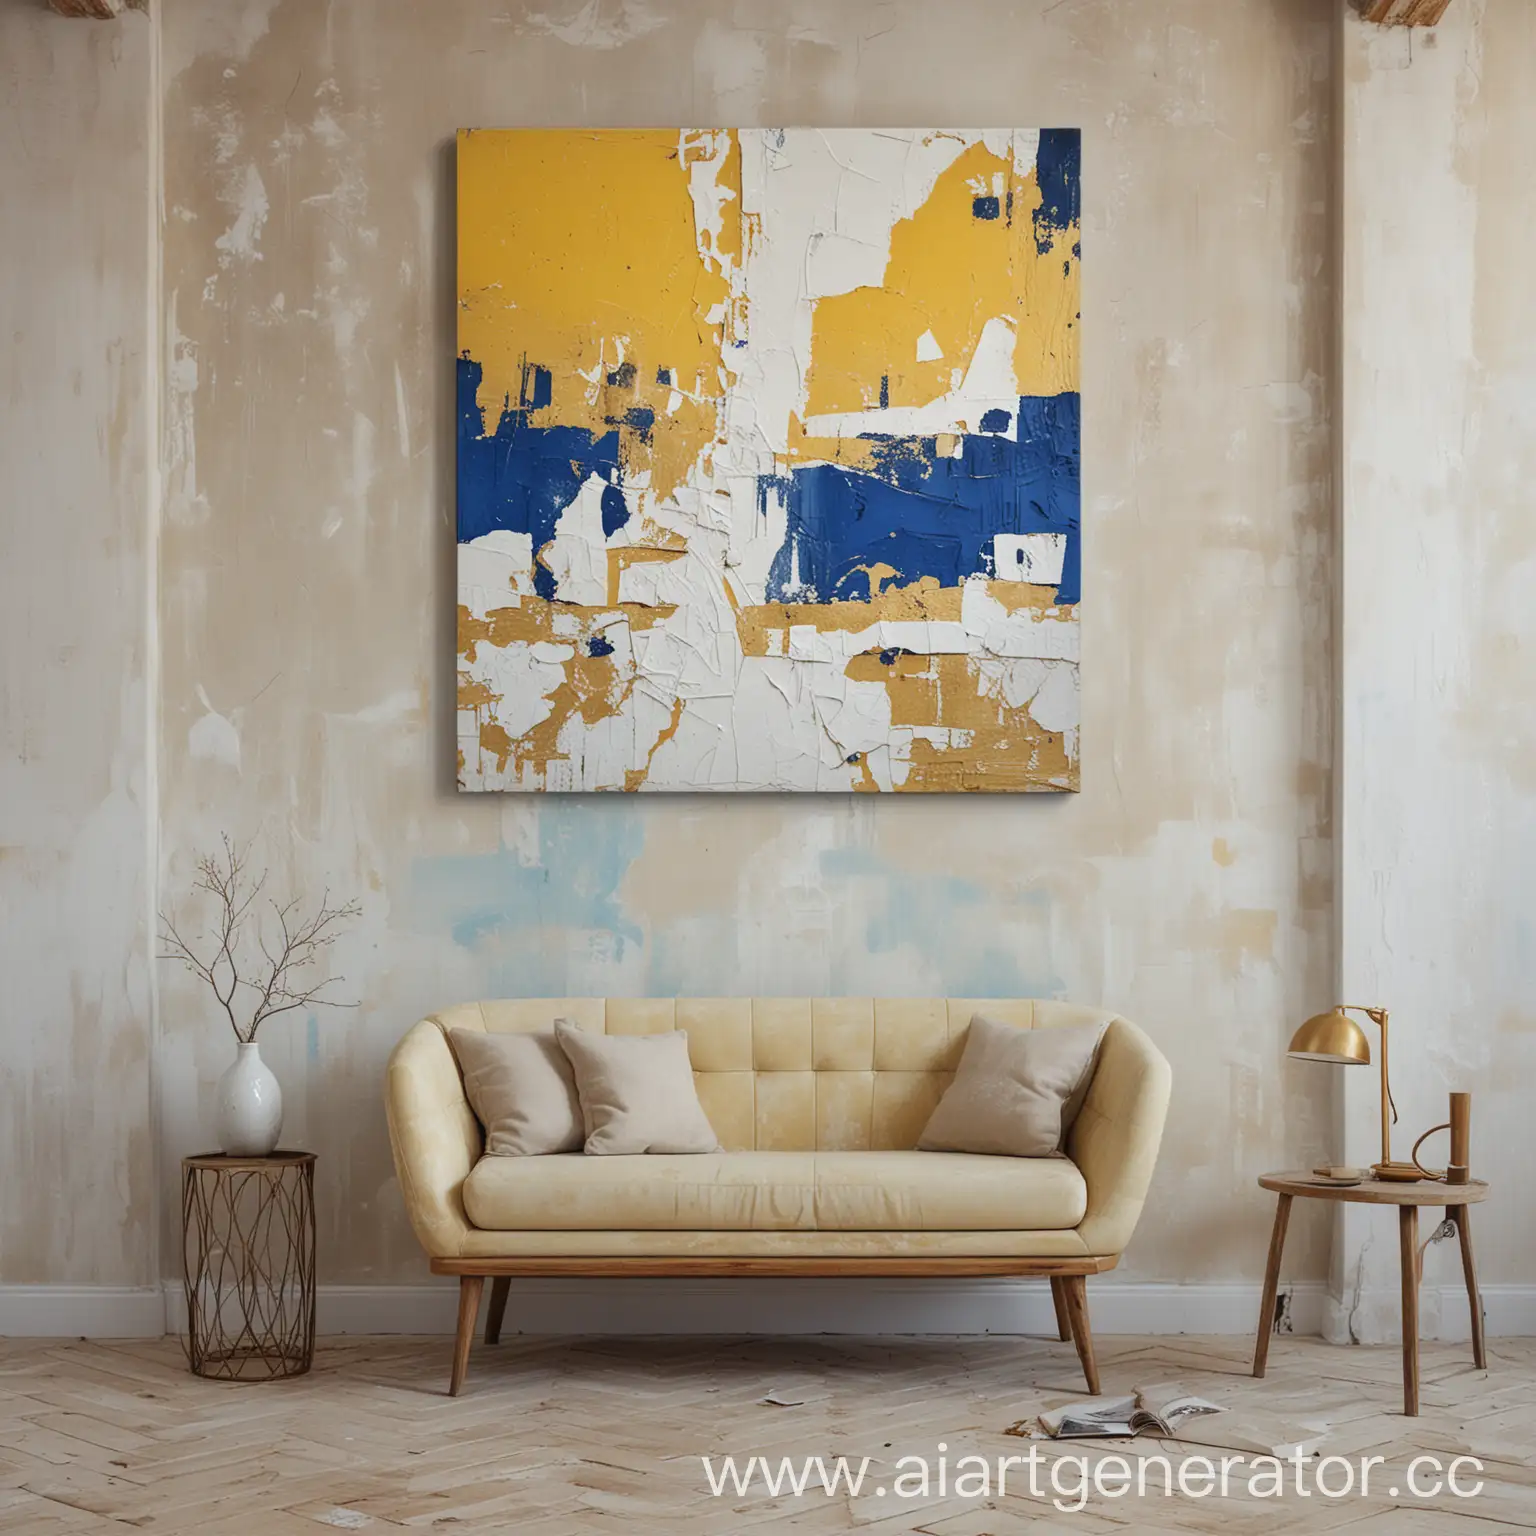 Abstract-Painting-in-Interior-with-Yellow-White-Blue-Colors-and-Old-Plaster-Texture